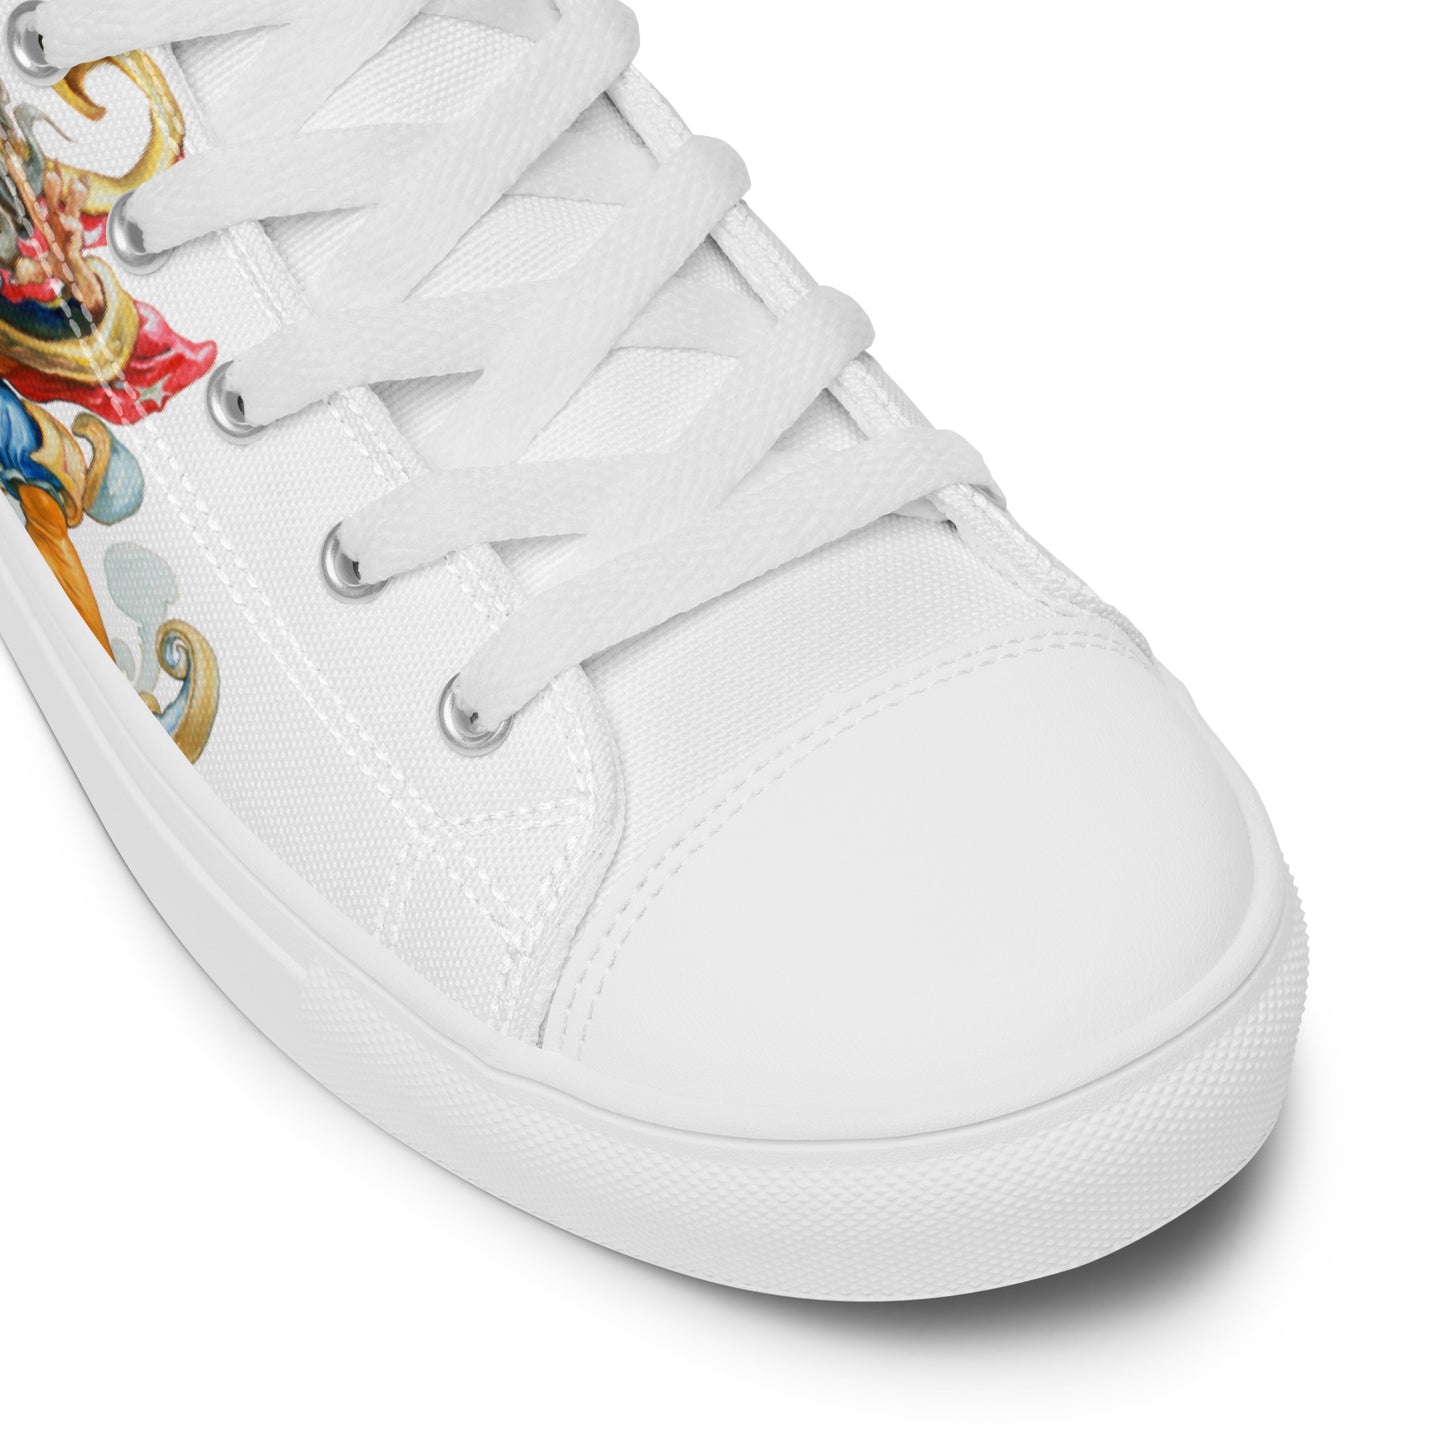 Women’s Rincewind Running High Top Canvas Shoes - Free Shipping *US SIZES SHOWN! USE CHART!